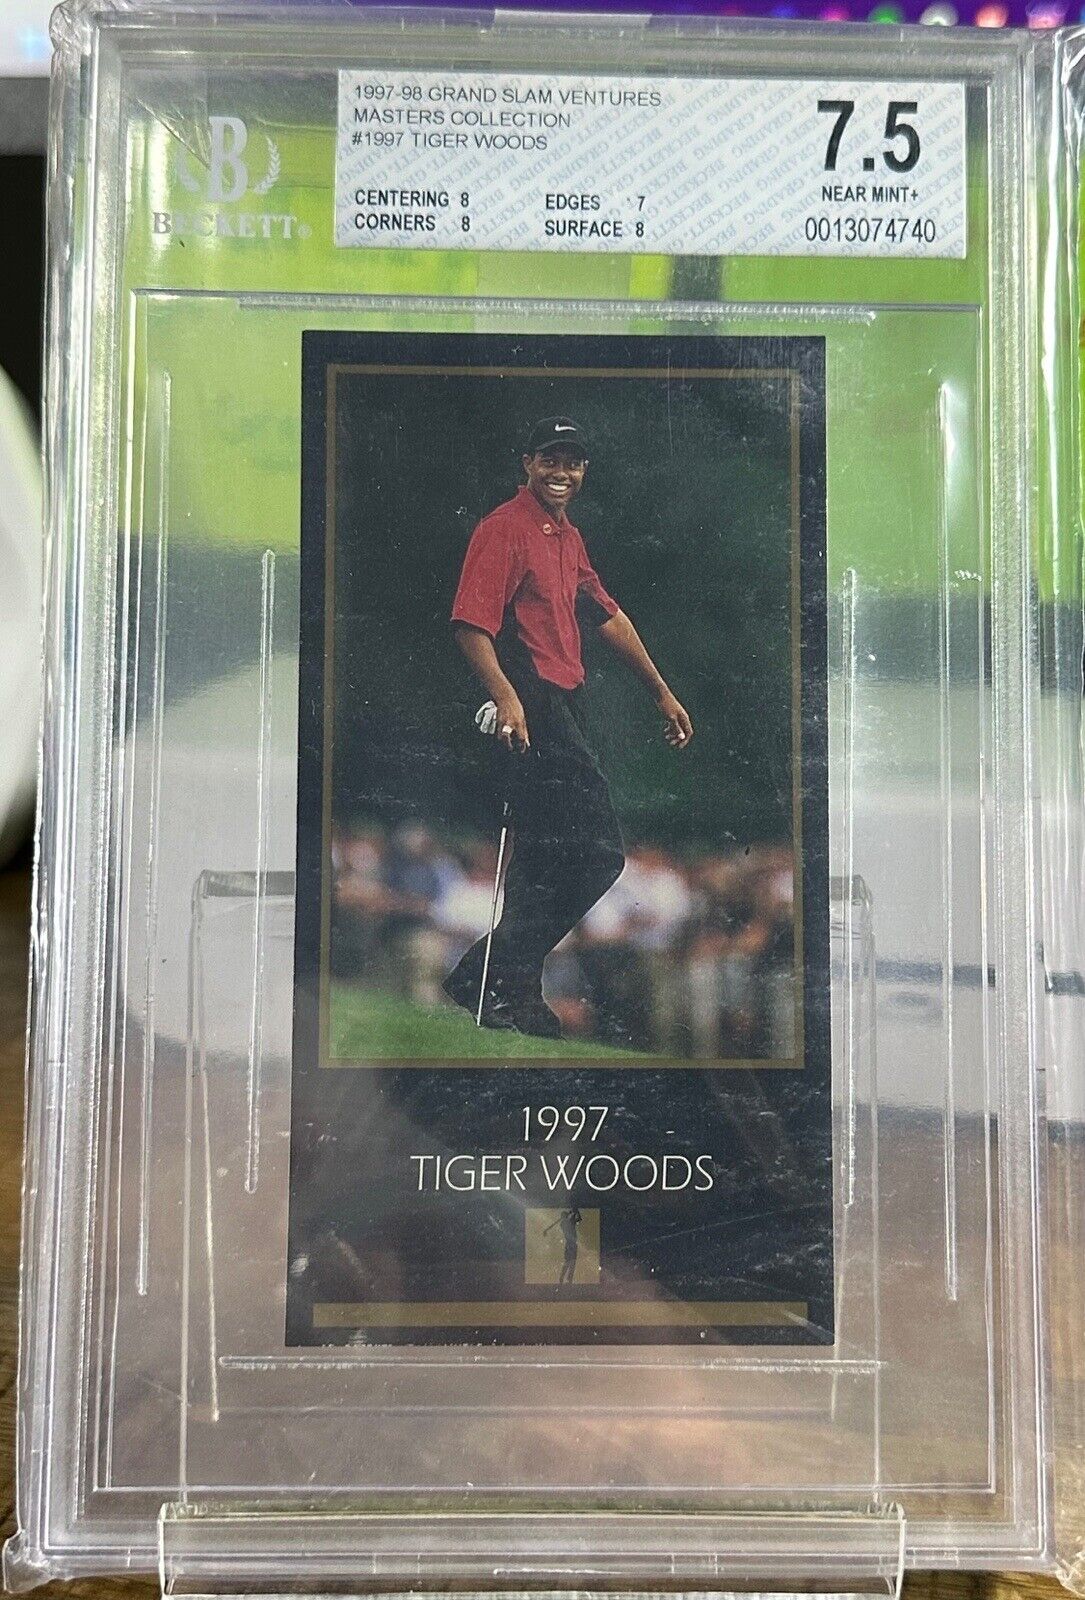 Tiger Woods 1997 THE MASTERS COLLECTION Grand Slam Ventures - BGS 7.5 JUMBO Card